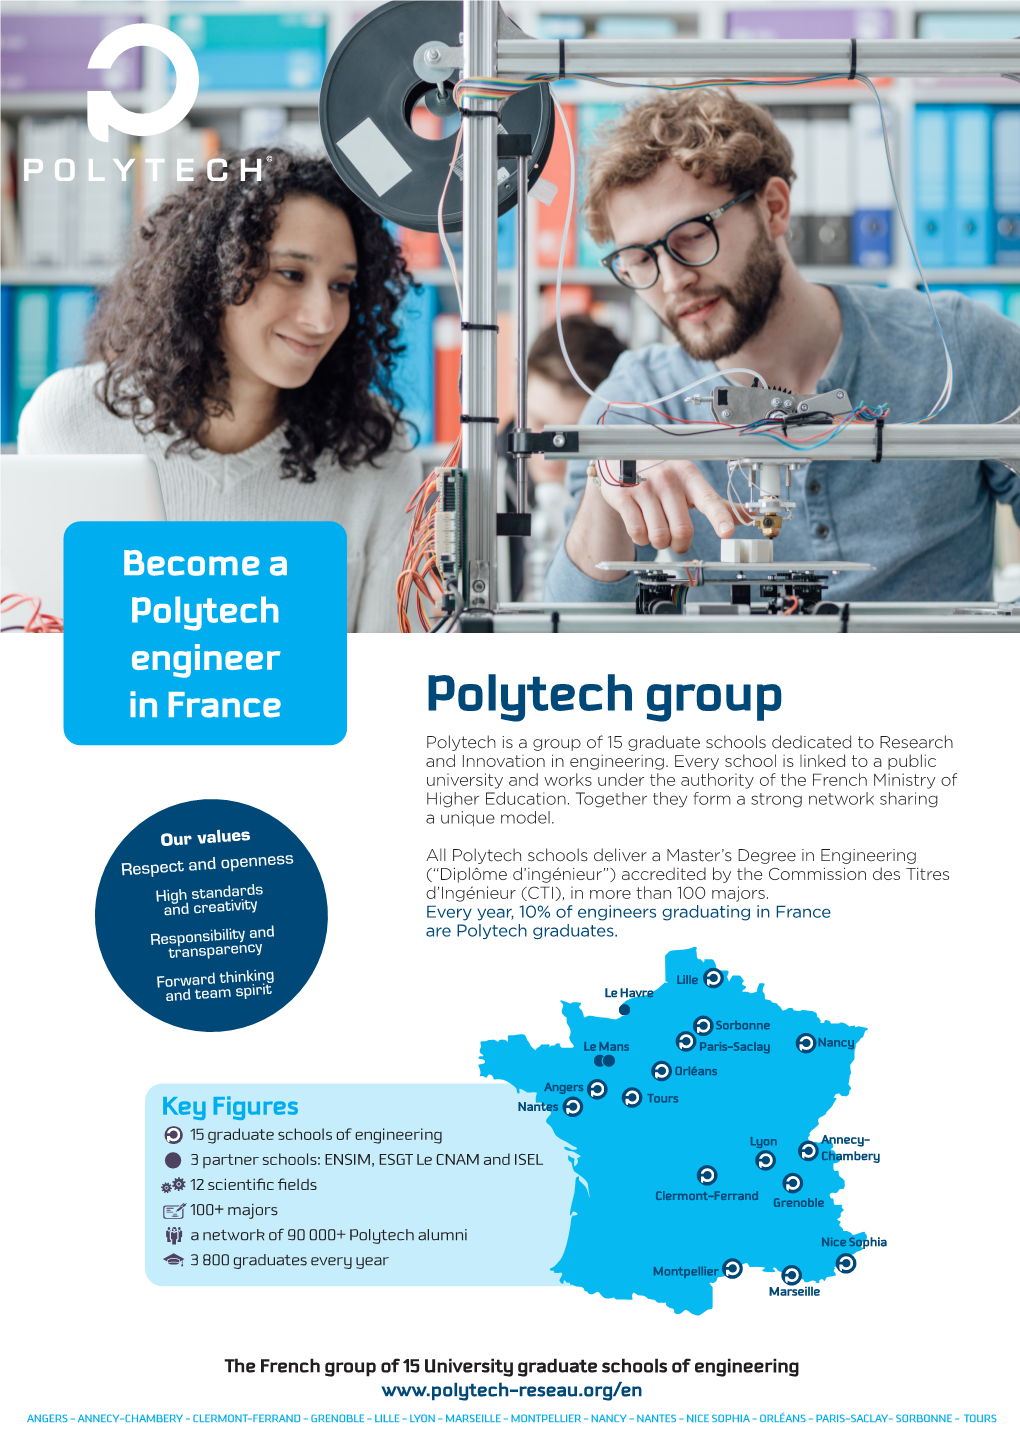 Polytech Group Polytech Is a Group of 15 Graduate Schools Dedicated to Research and Innovation in Engineering